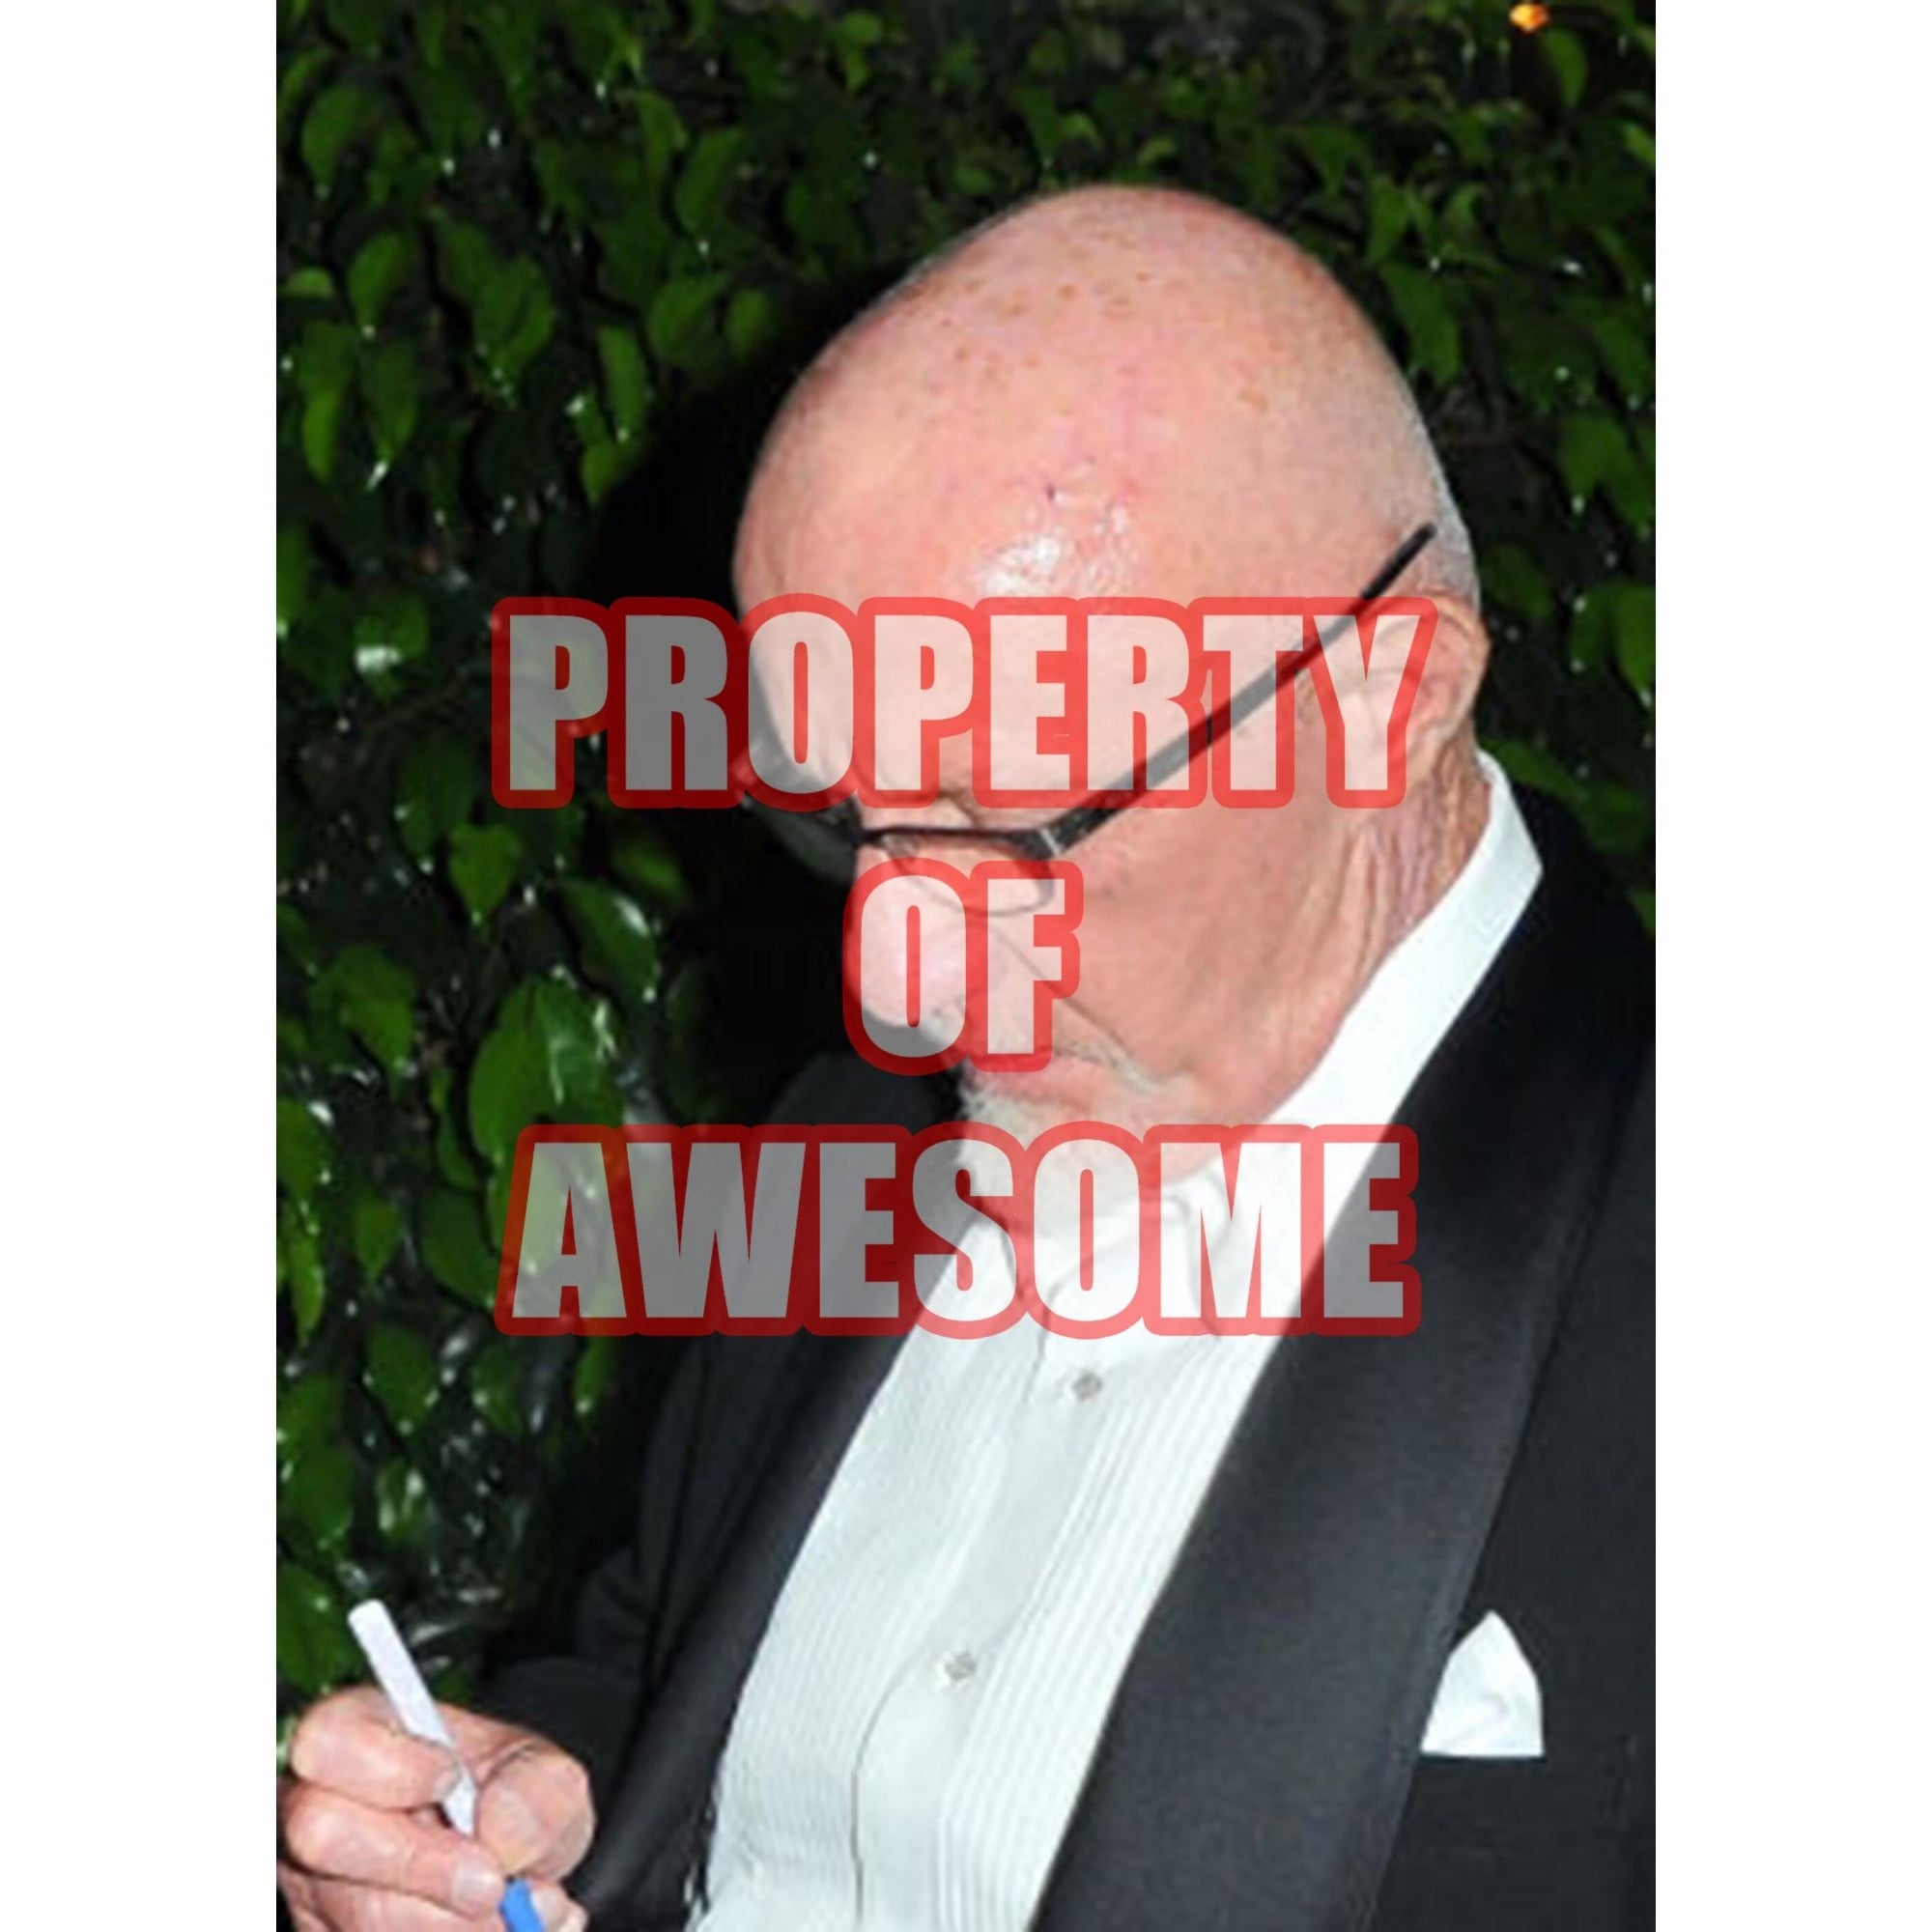 Jonathan Banks Breaking Bad 5 x 7 photo signed with proof